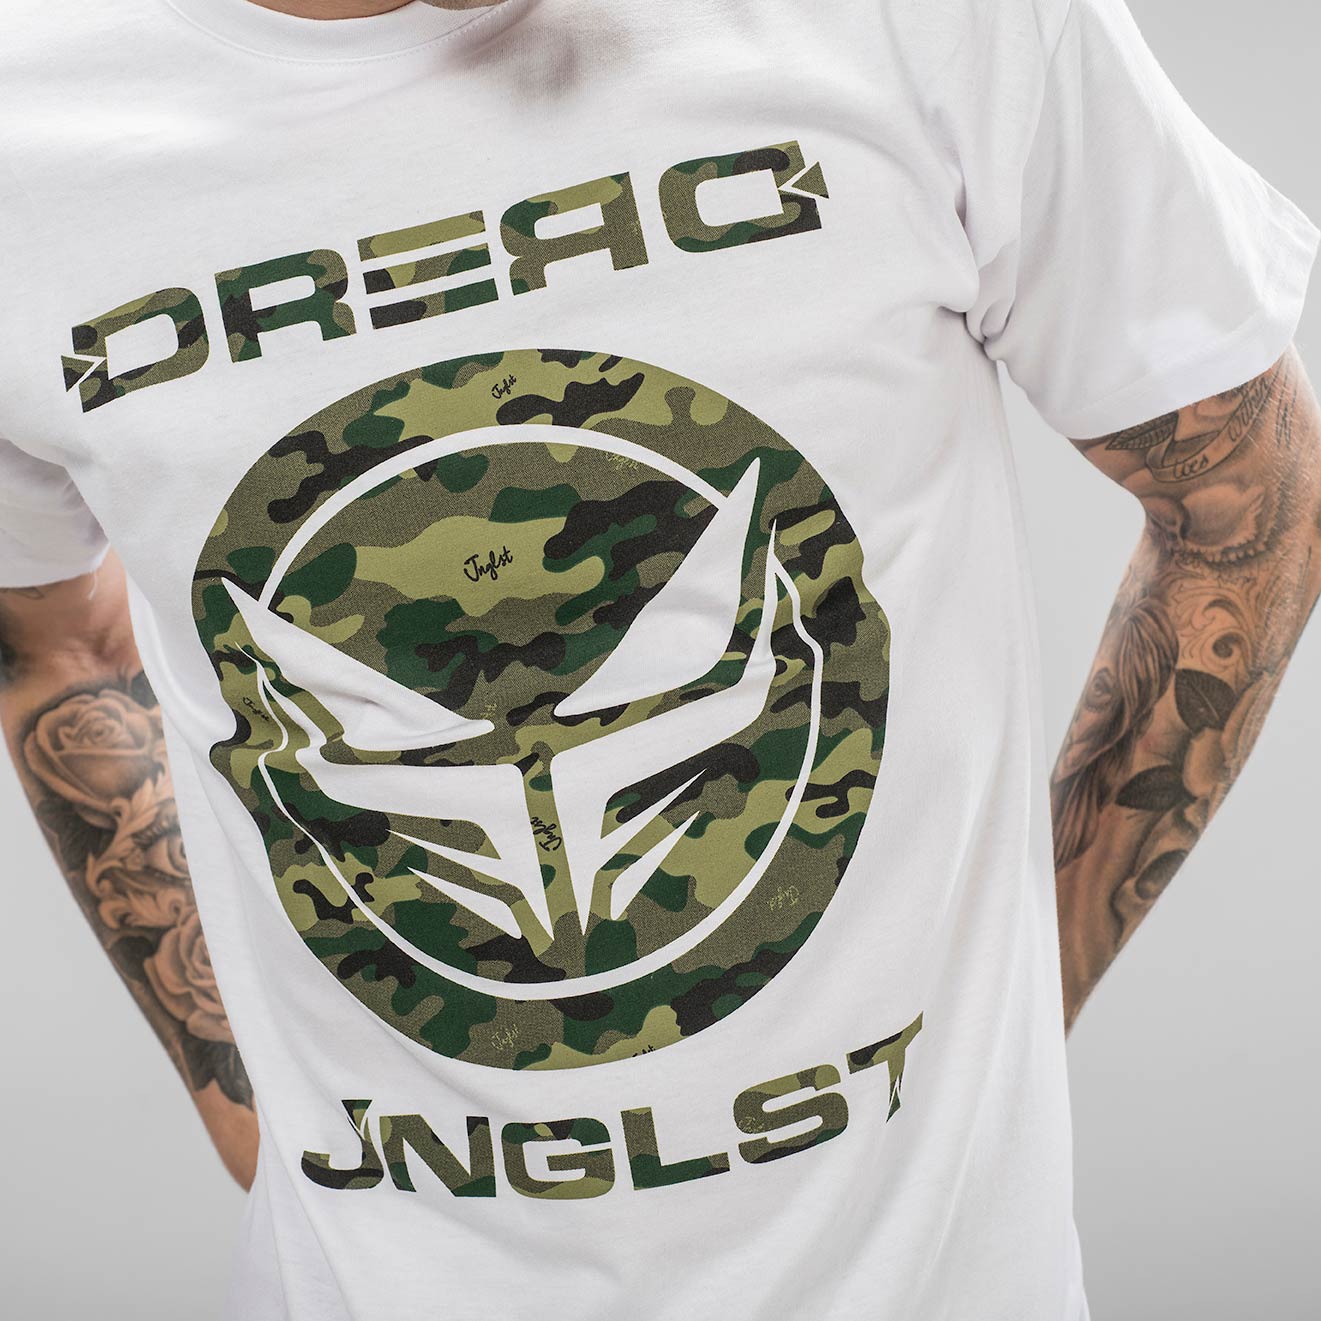 Dread Junglist Collab White T-Shirt from the Front